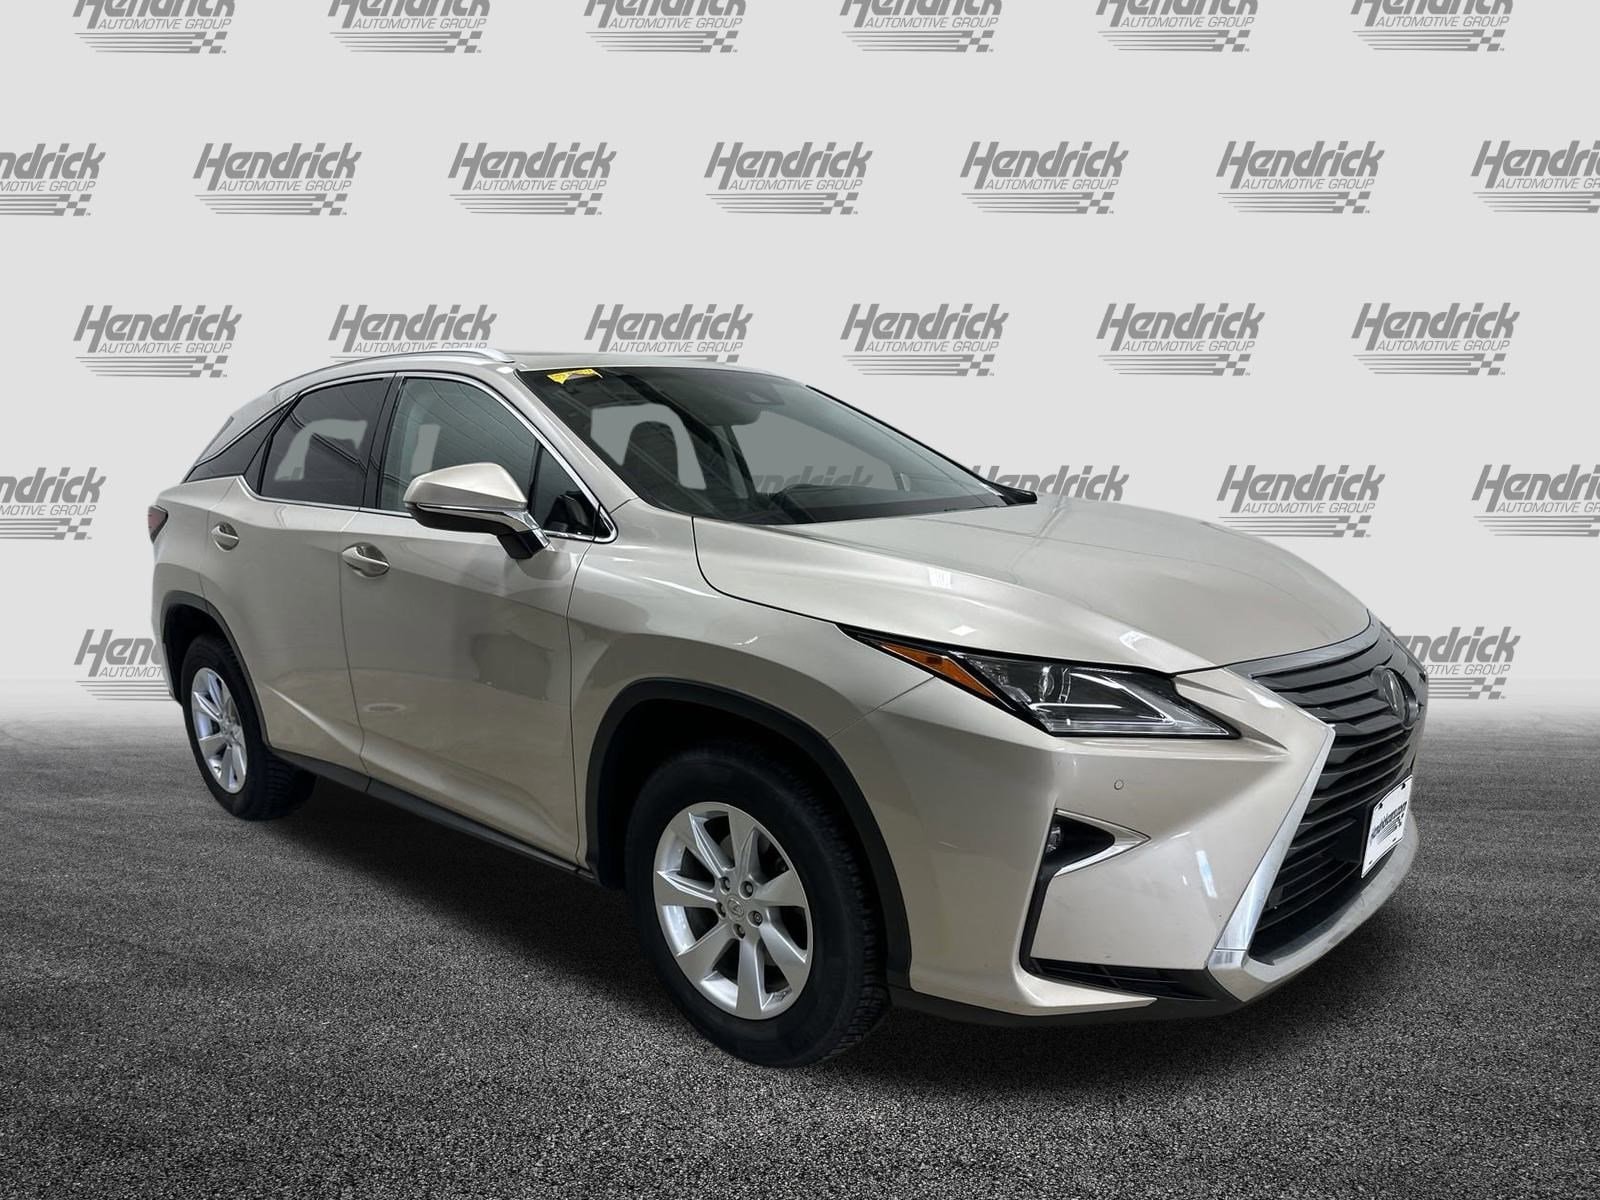 Used 2017 Lexus RX 350 with VIN 2T2ZZMCA4HC041253 for sale in Kansas City